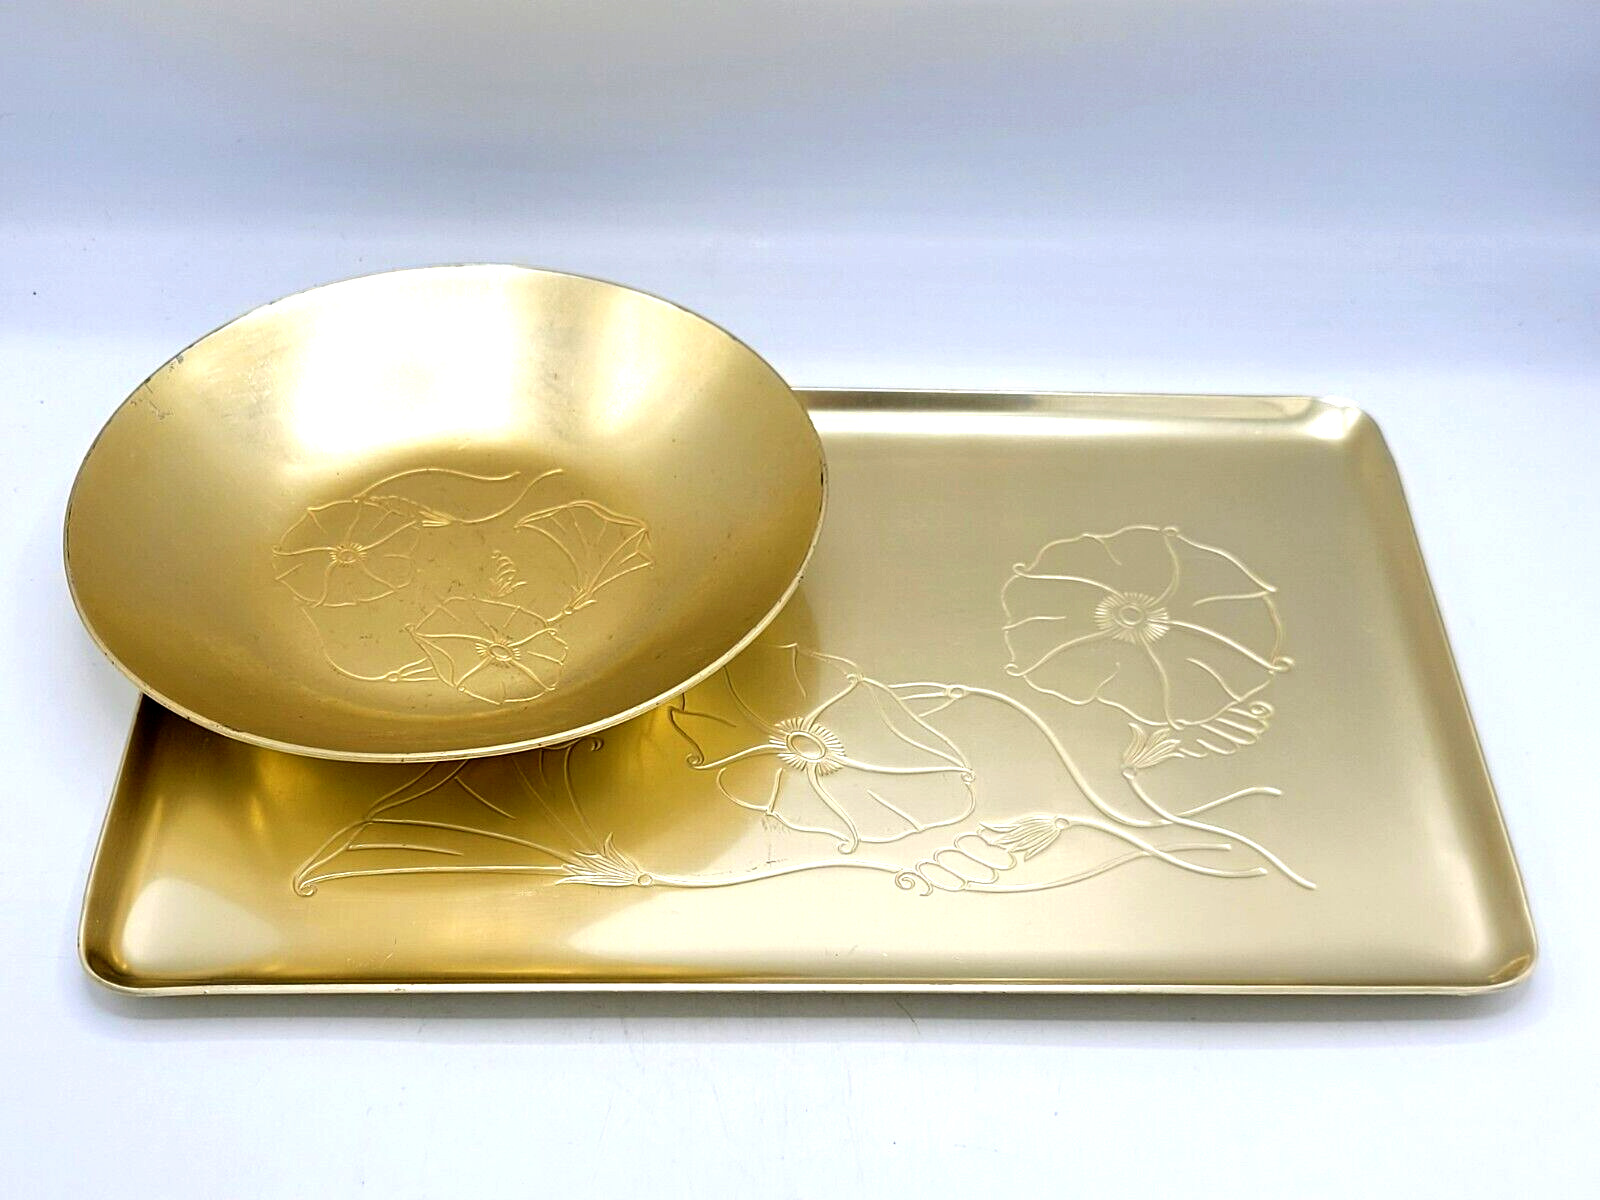 Vintage Neocraft by Everlast Gold Tone Aluminum Tray & Bowl Morning Glories